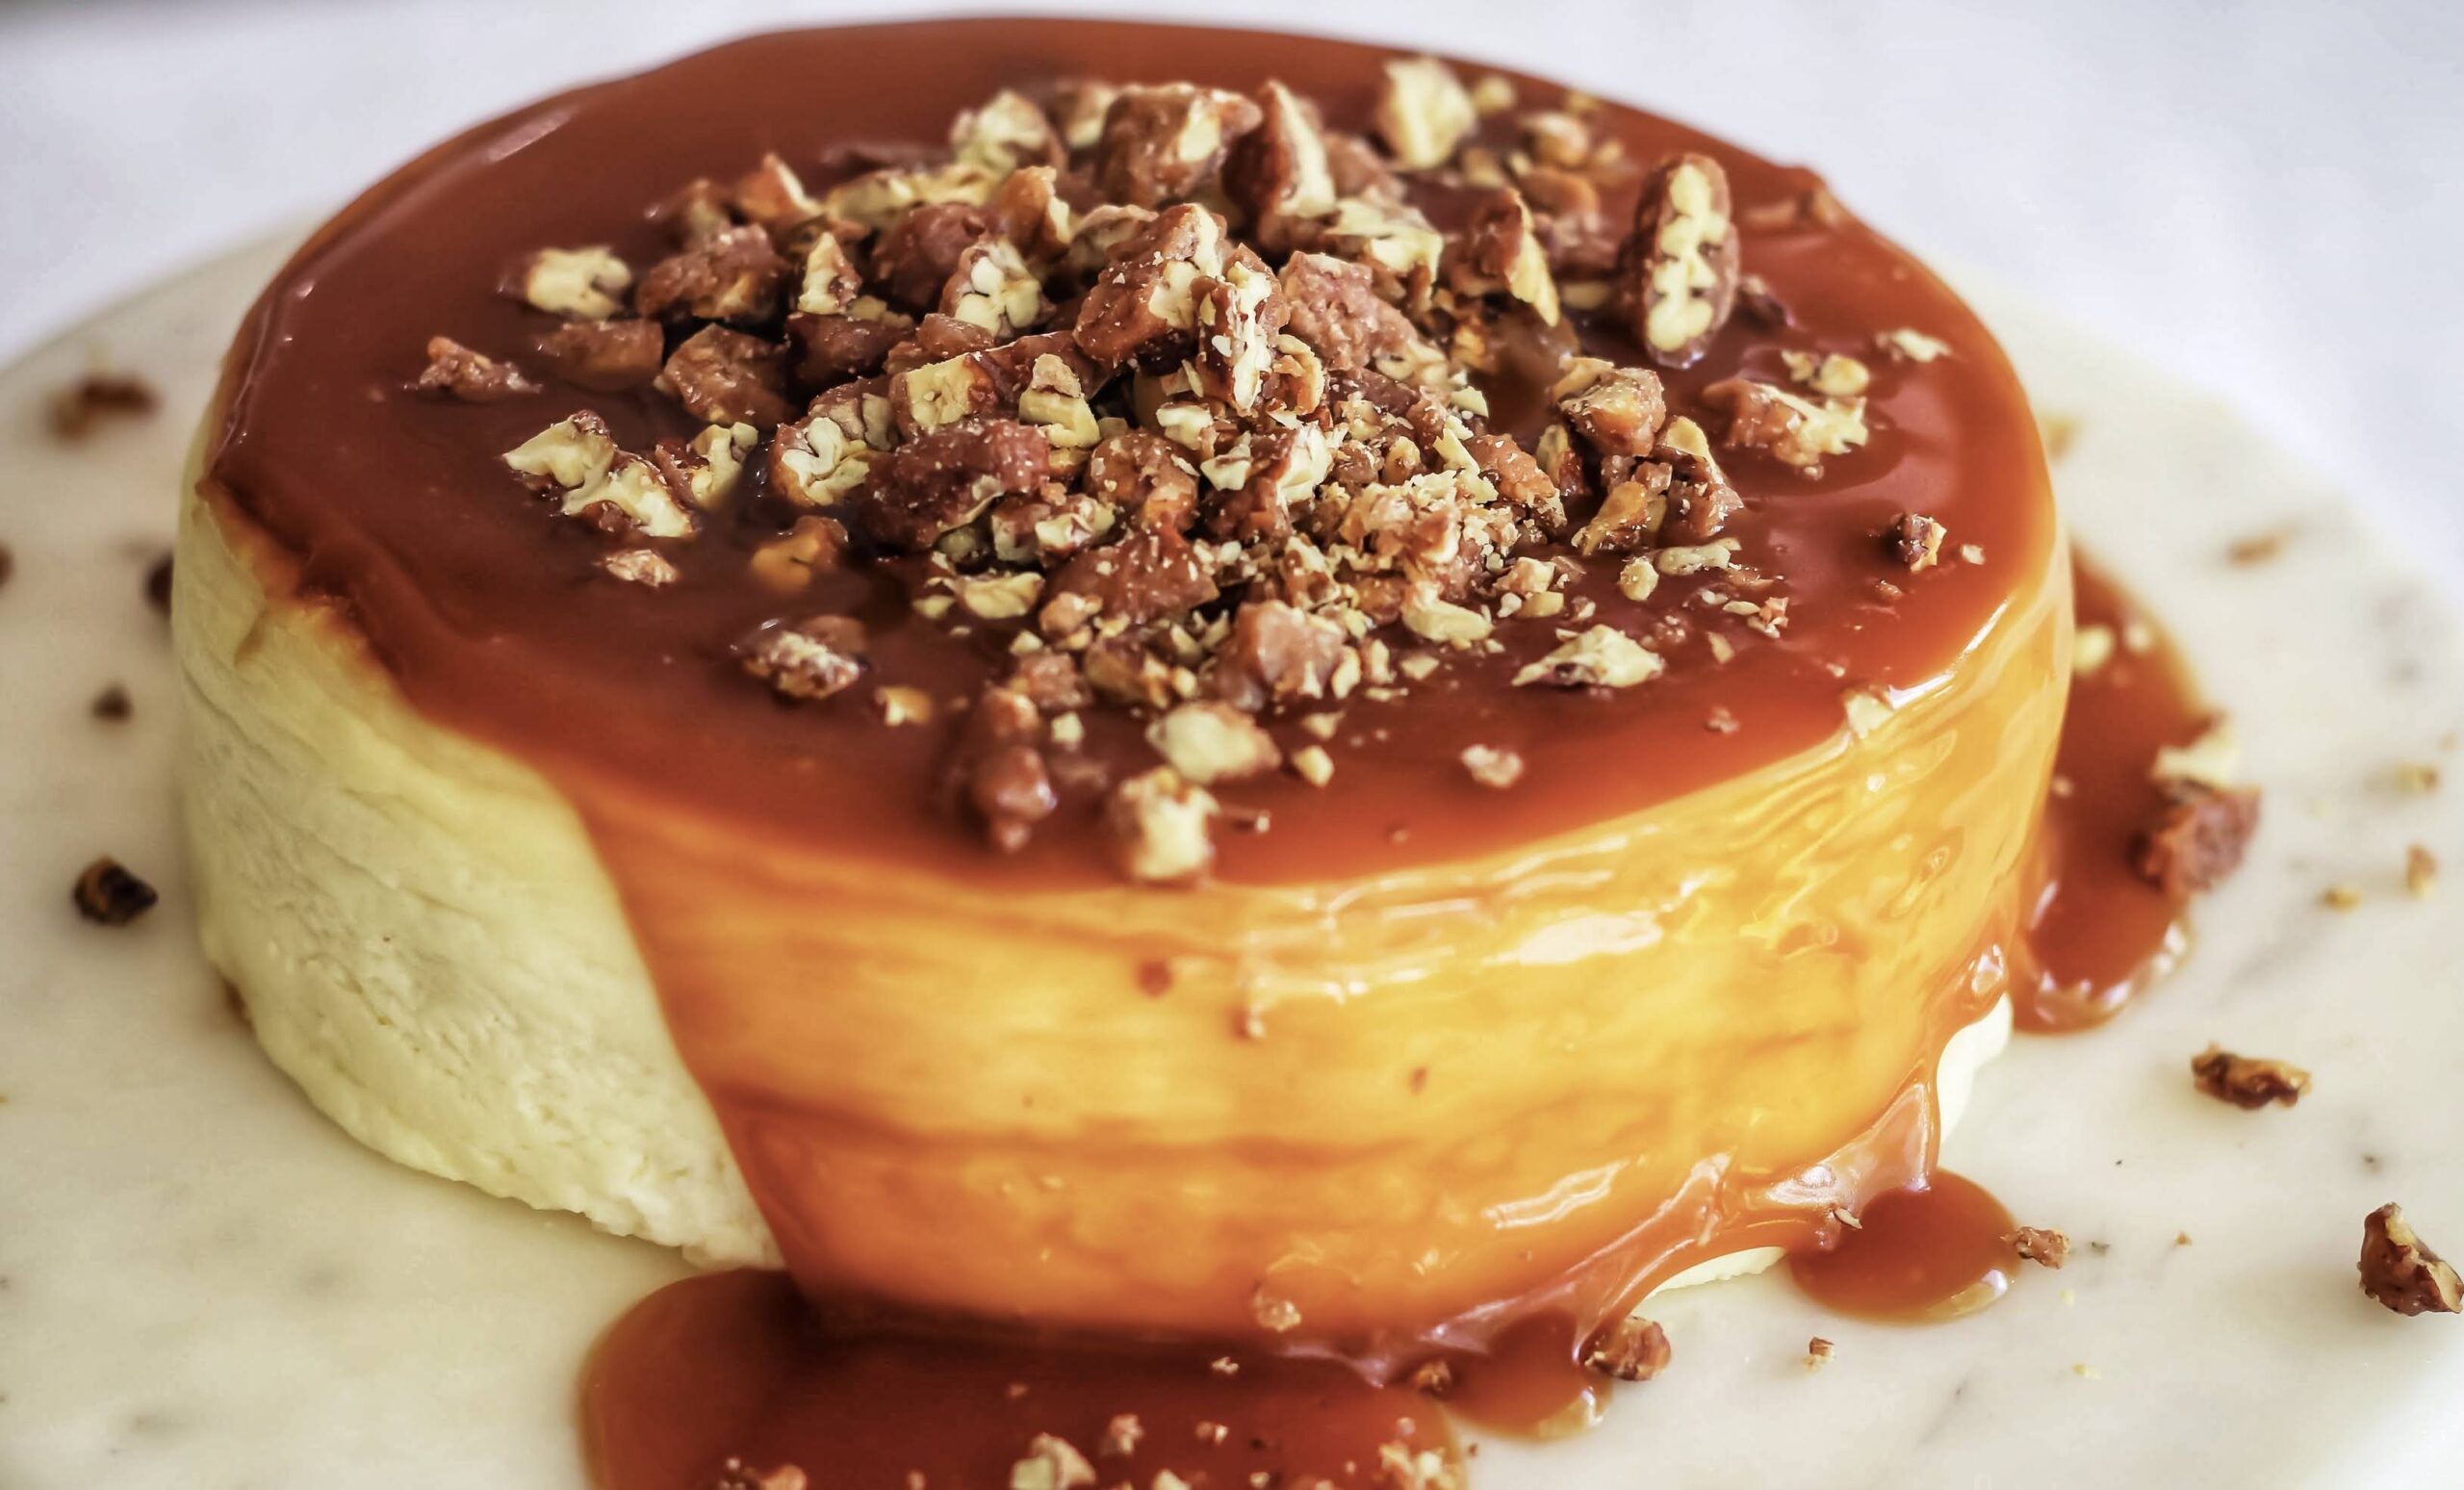 A cheesecake with nuts and caramel sauce on top.